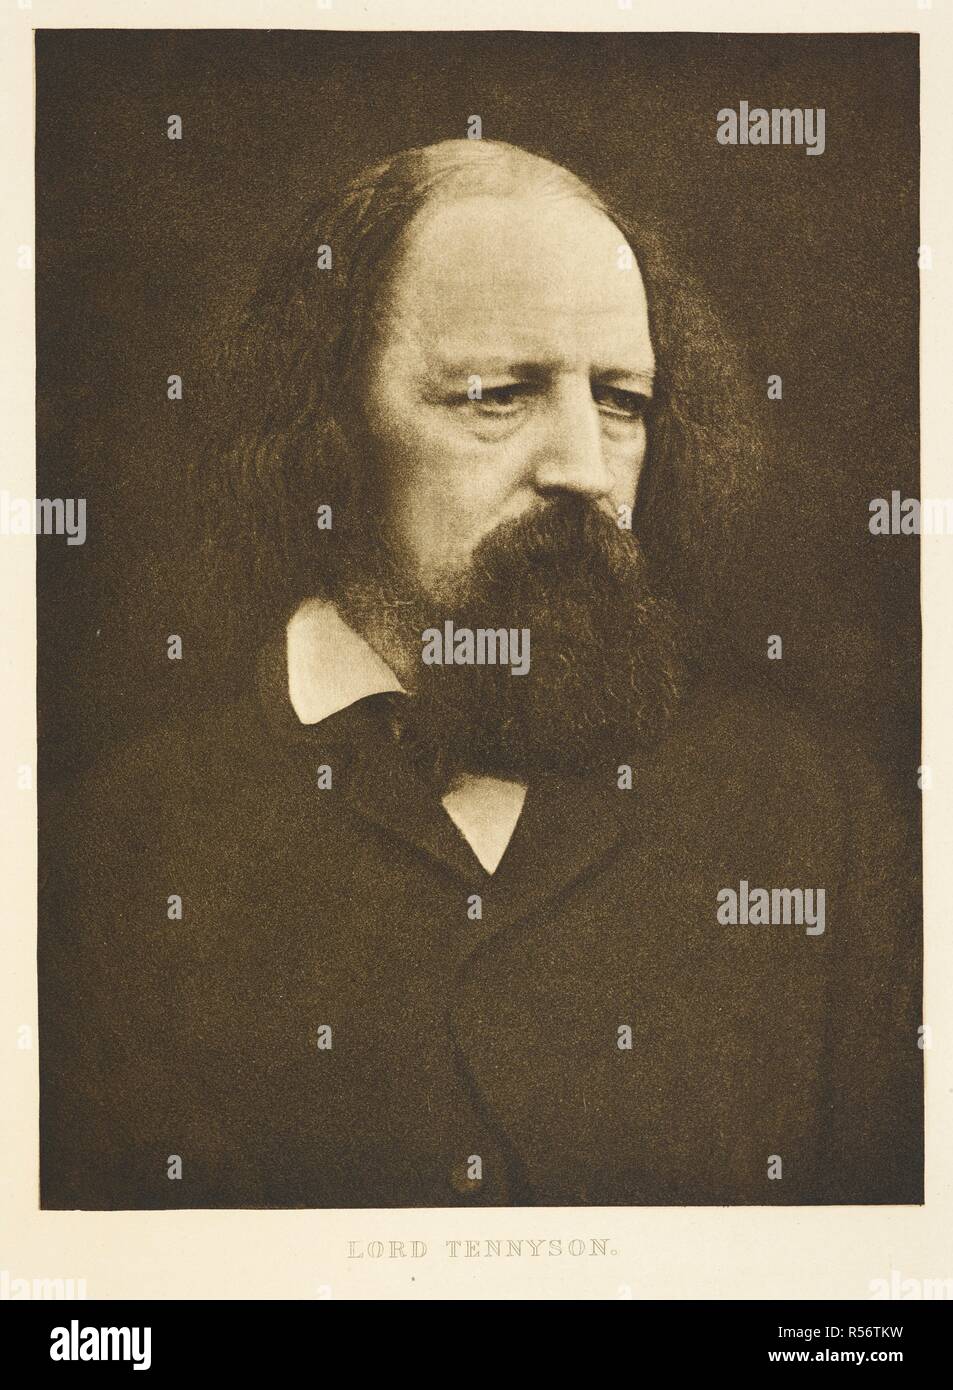 'Lord Tennyson.' Portrait of Alfred Tennyson, 1st Baron Tennyson, FRS (6 August 1809 â€“ 6 October 1892). English poet. Sun Artists. Original series. Edited by W. A. Boord. [Reproductions of photographs, with descriptive text.]. London : Kegan Paul & Co., 1889-91. Source: 1757.b.14. Author: CAMERON, JULIA MARGARET. Stock Photo